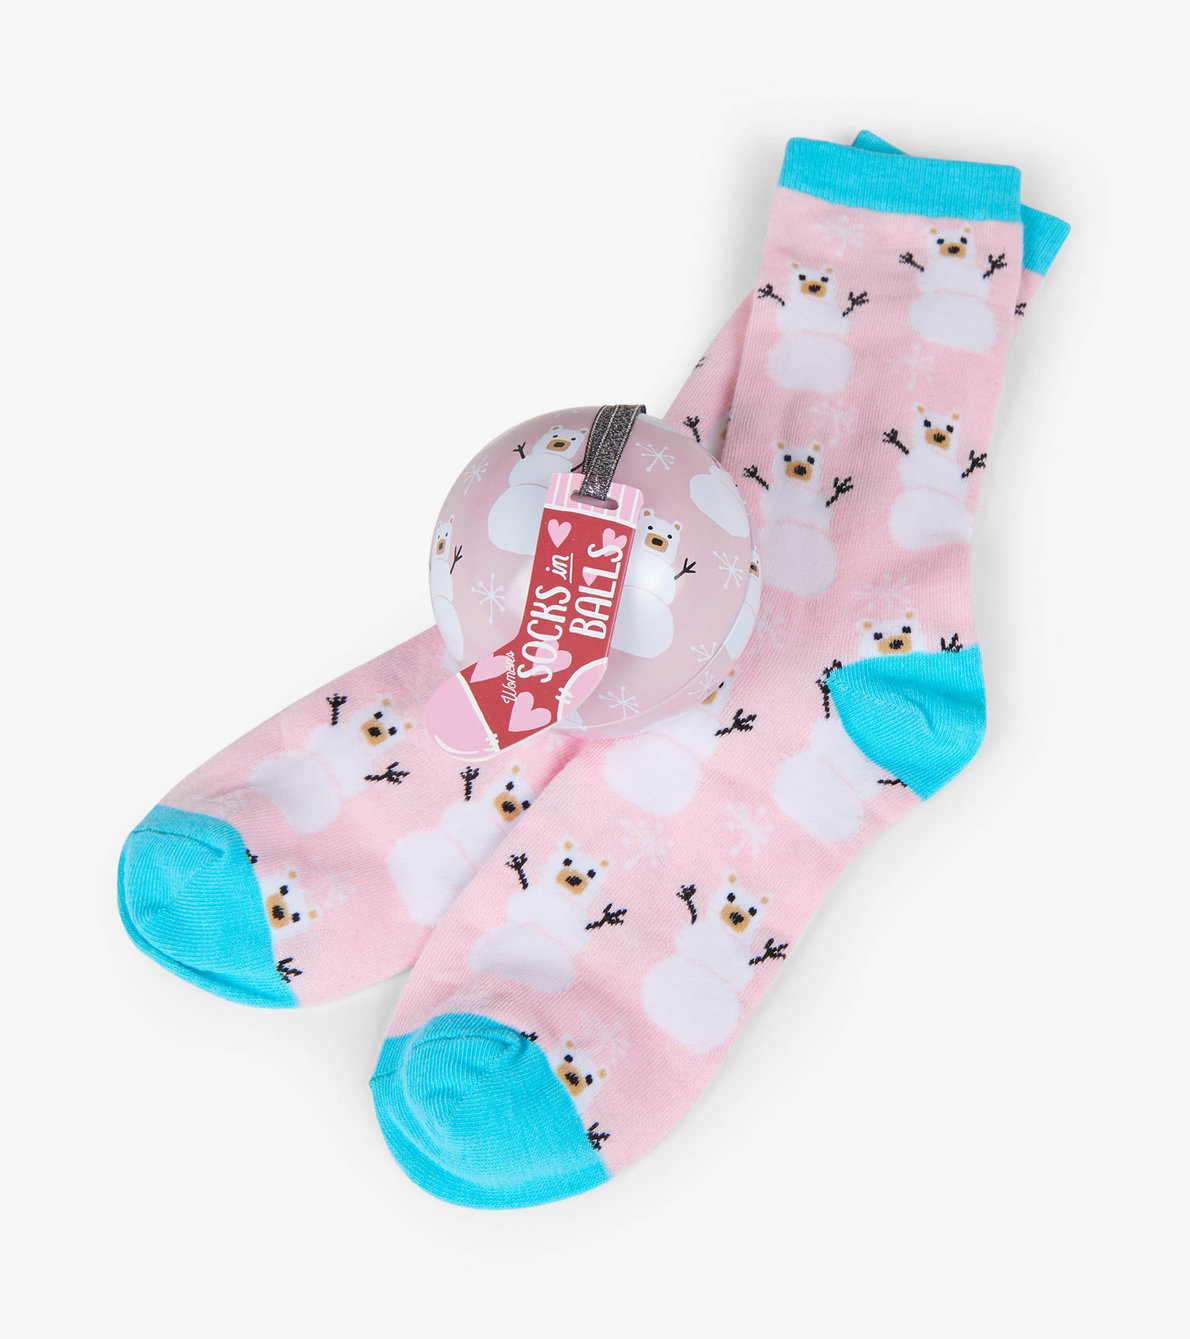 View larger image of Pink Snow Bears Women's Socks in Balls